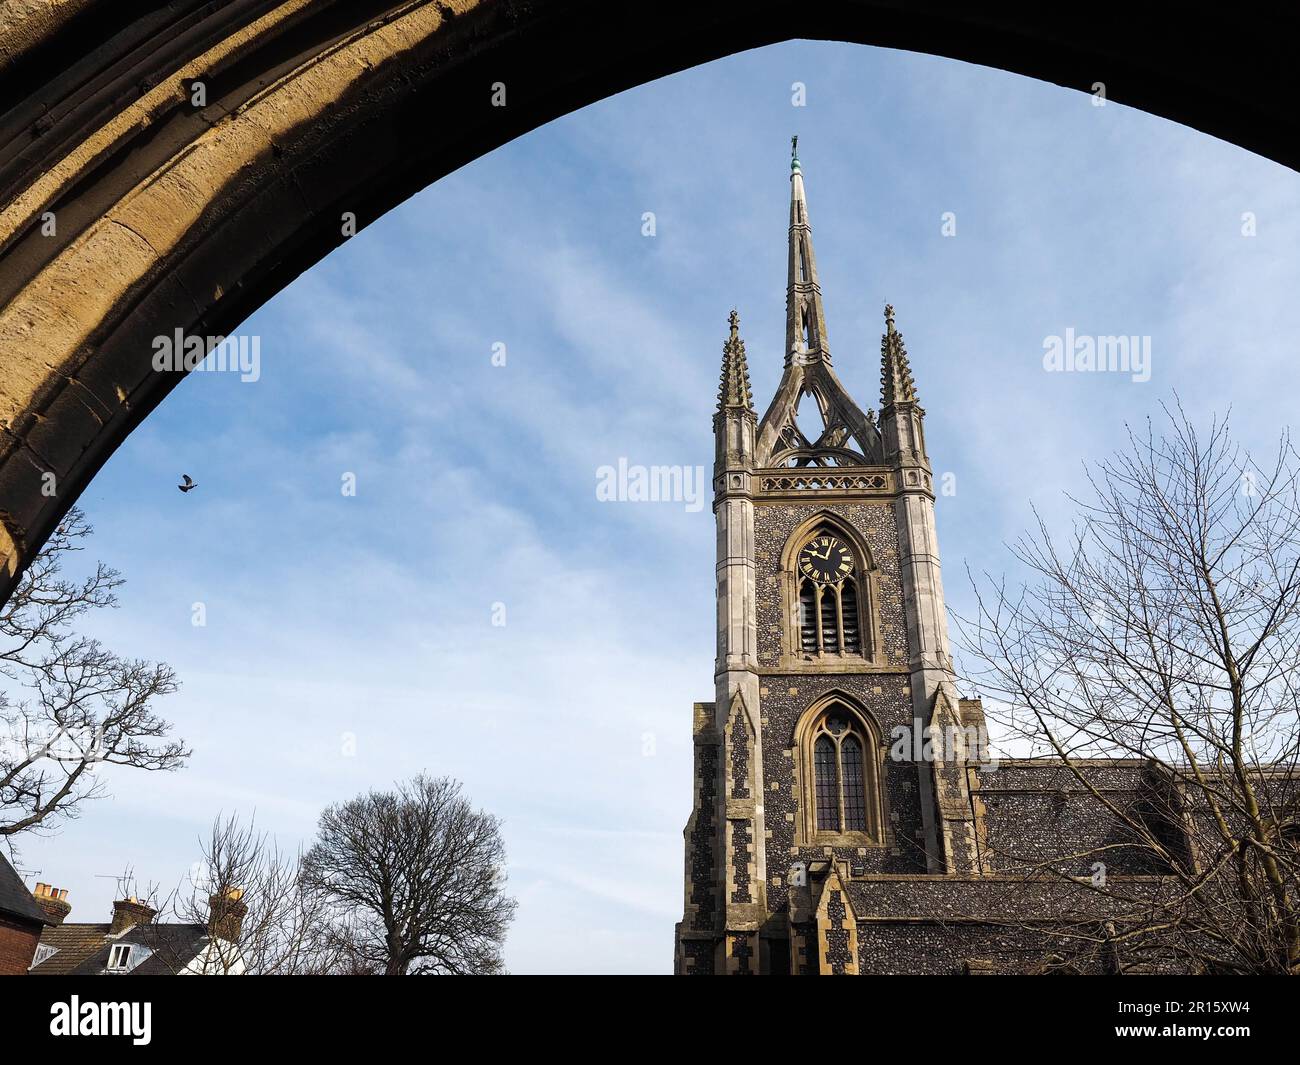 FAVERSHAM, KENT/UK - MARCH 29 : View of St Mary of Charity Church in Faversham Kent on March 29, 2014 Stock Photo